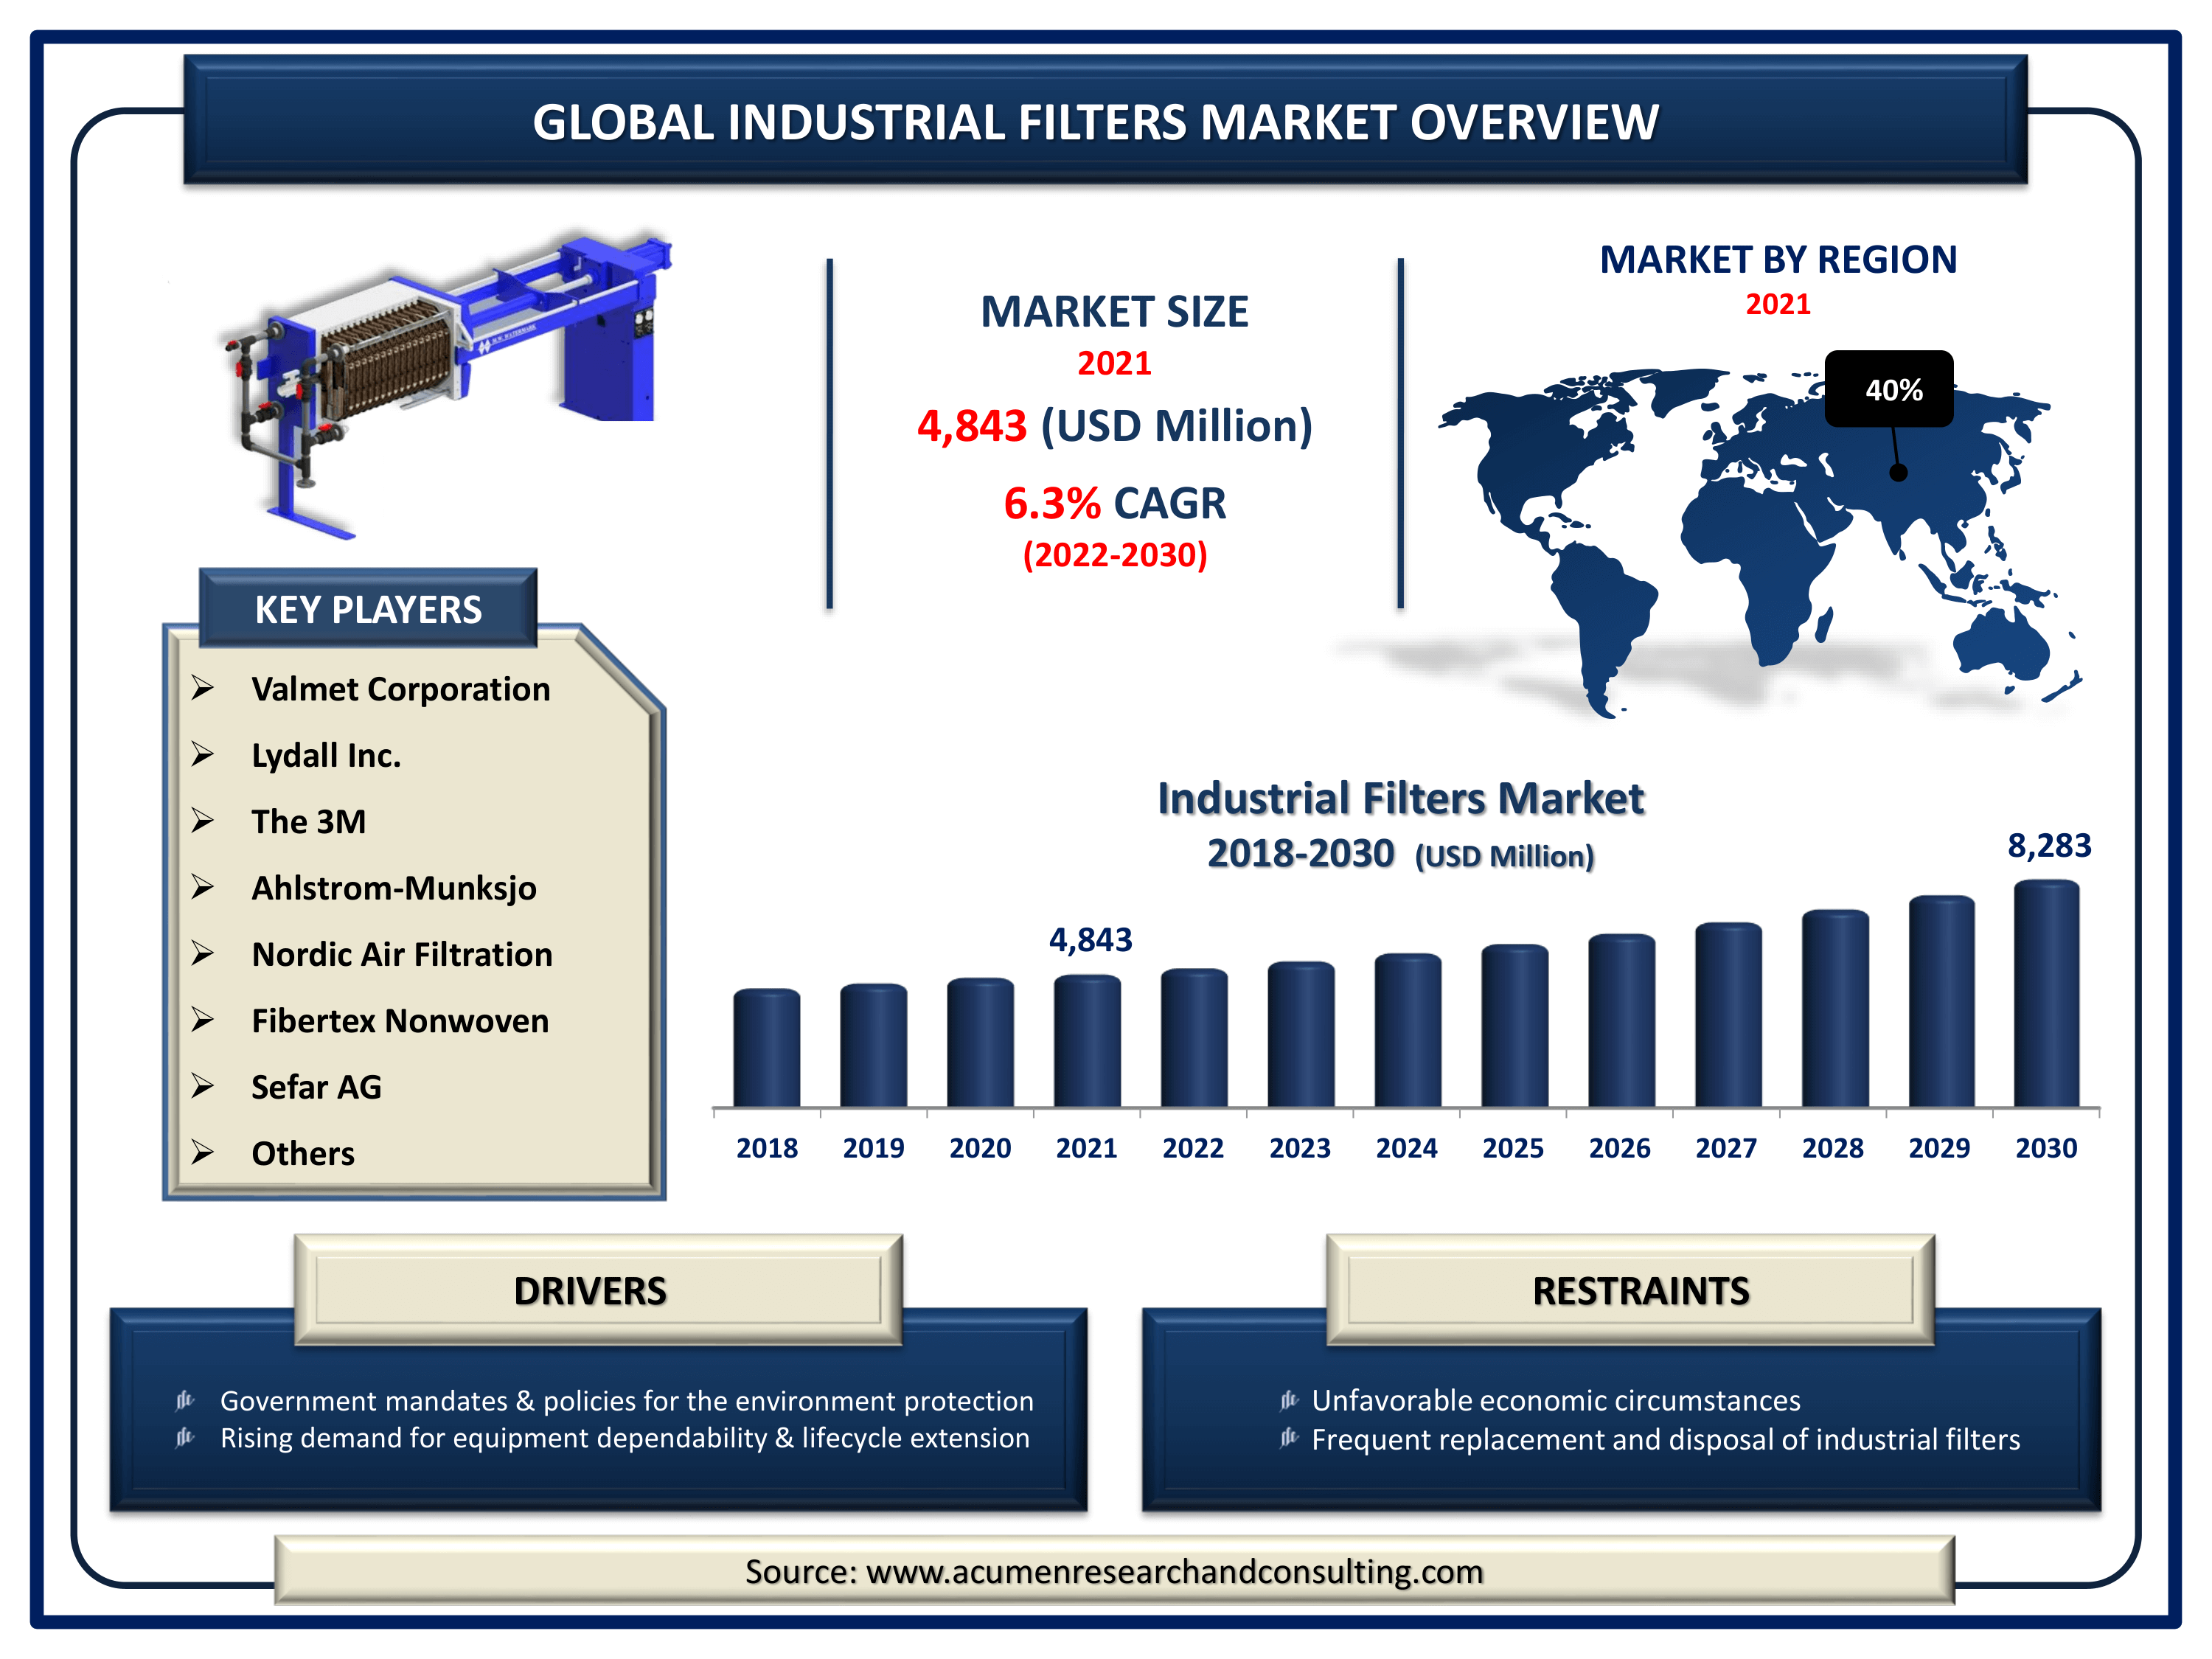 Global industrial filters market revenue is estimated to expand by USD 8,283 Million by 2030, with a 6.3% CAGR from 2022 to 2030.